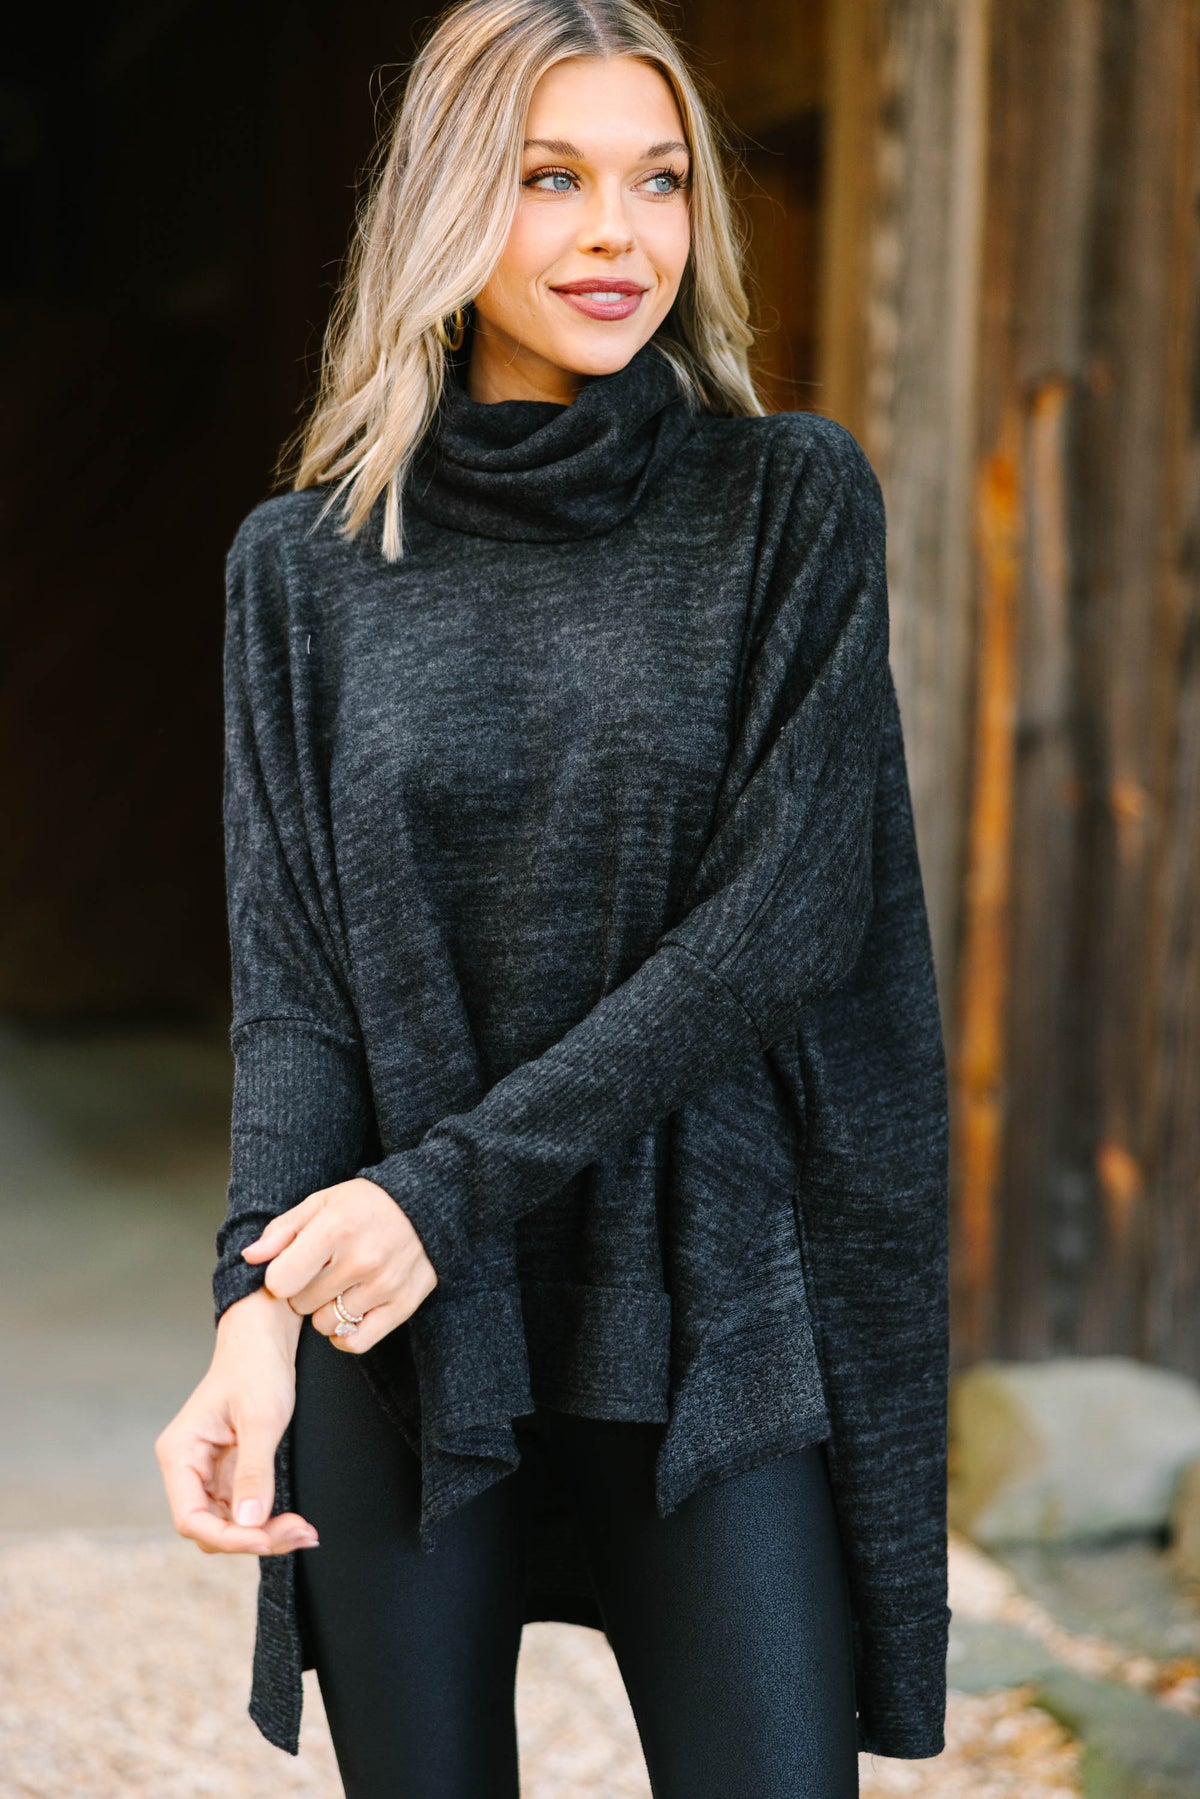 Cozy Comfy Charcoal Gray Cowl Neck Sweater - Oversized – Shop the Mint